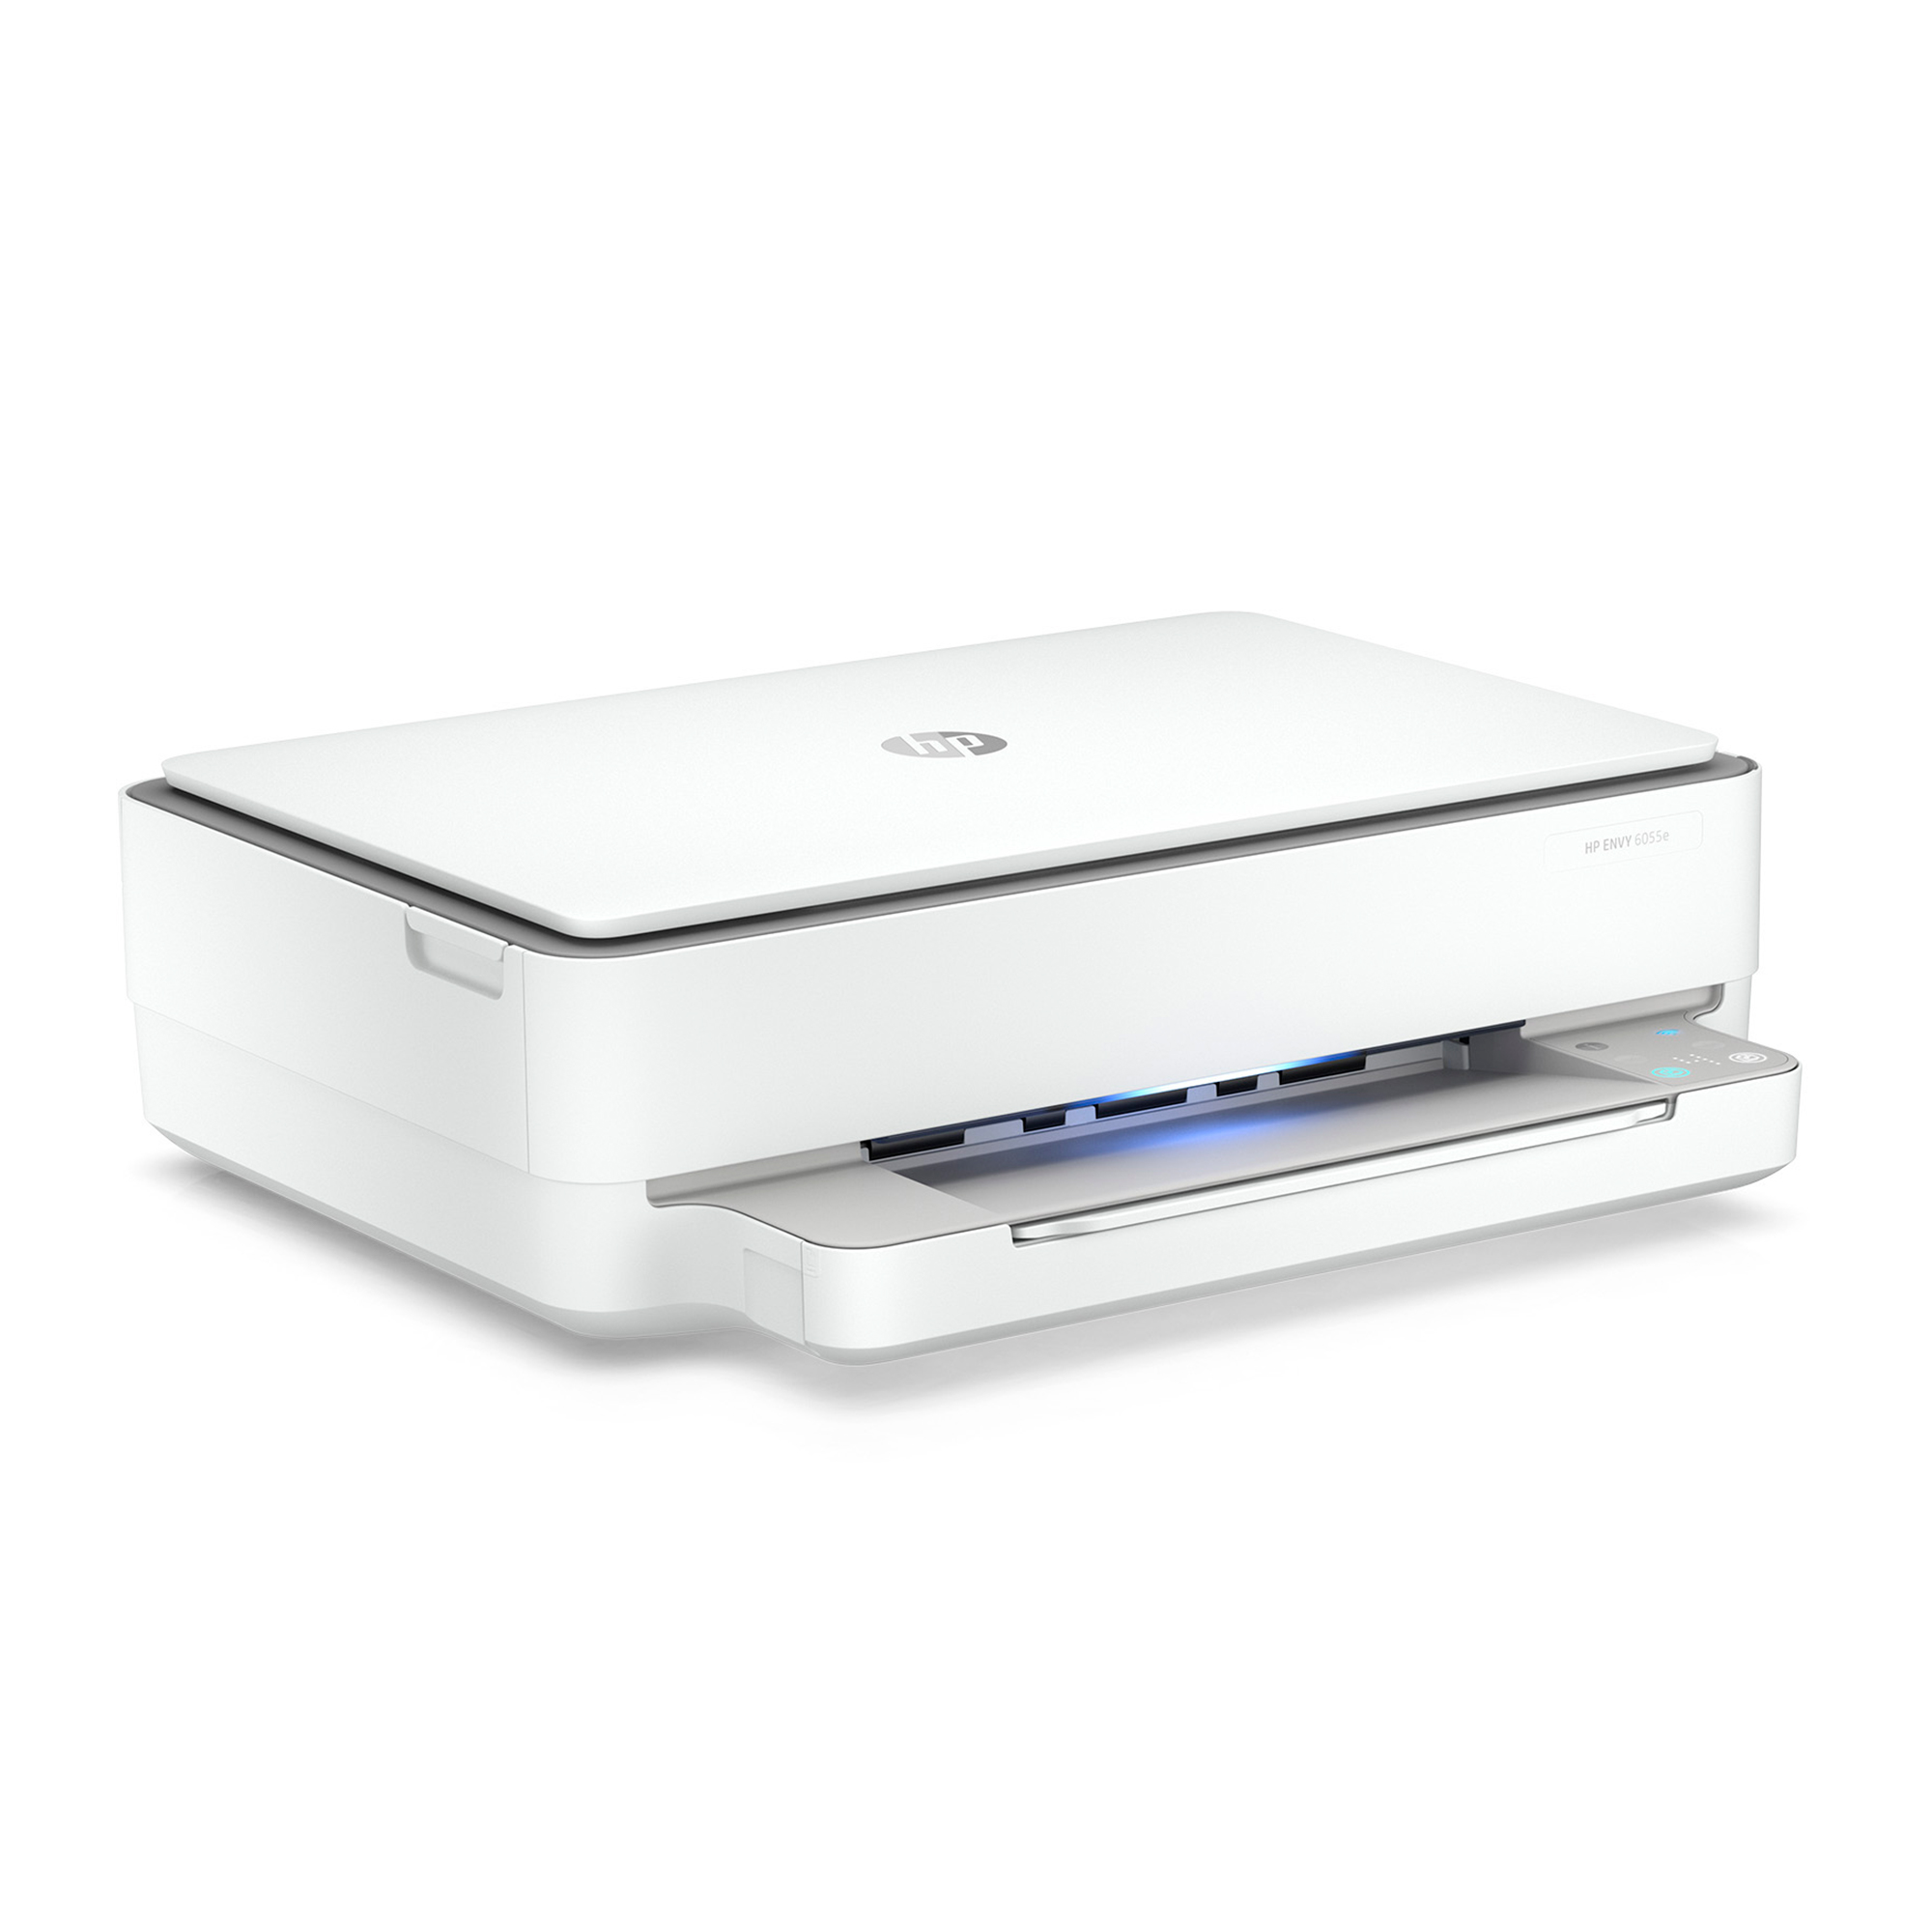 HP ENVY 6055e All-in-One Wireless Color Inkjet Printer -  3 Months Free Instant Ink with HP+ - image 1 of 19